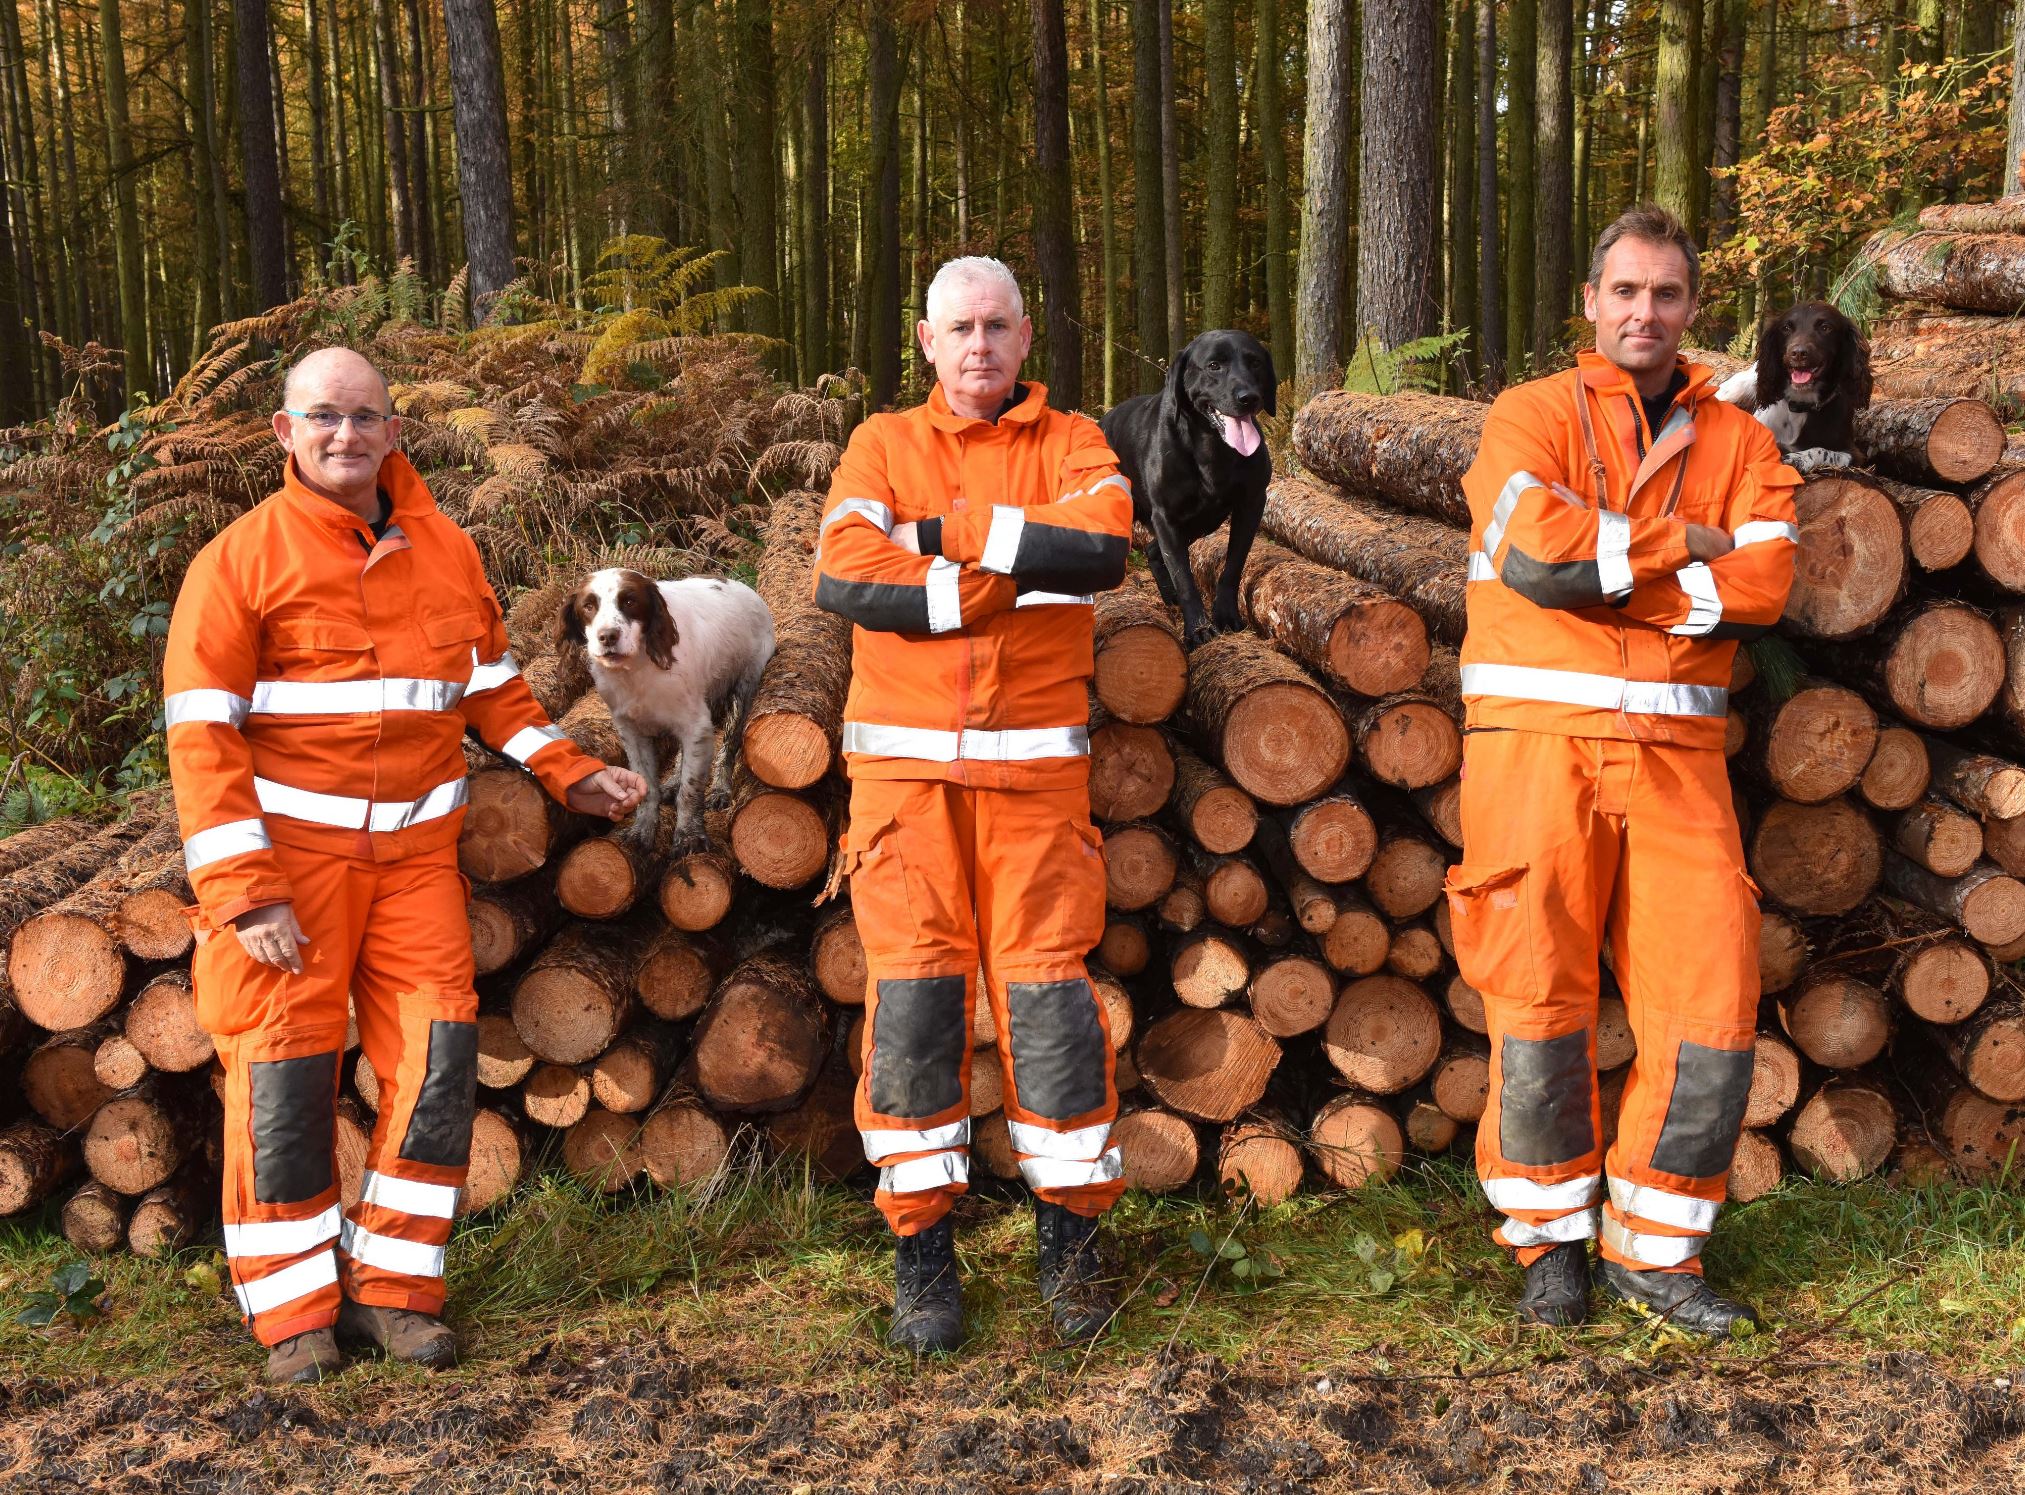 3 Urban search and rescue firefighters stood with 3 urban search and rescue dogs.